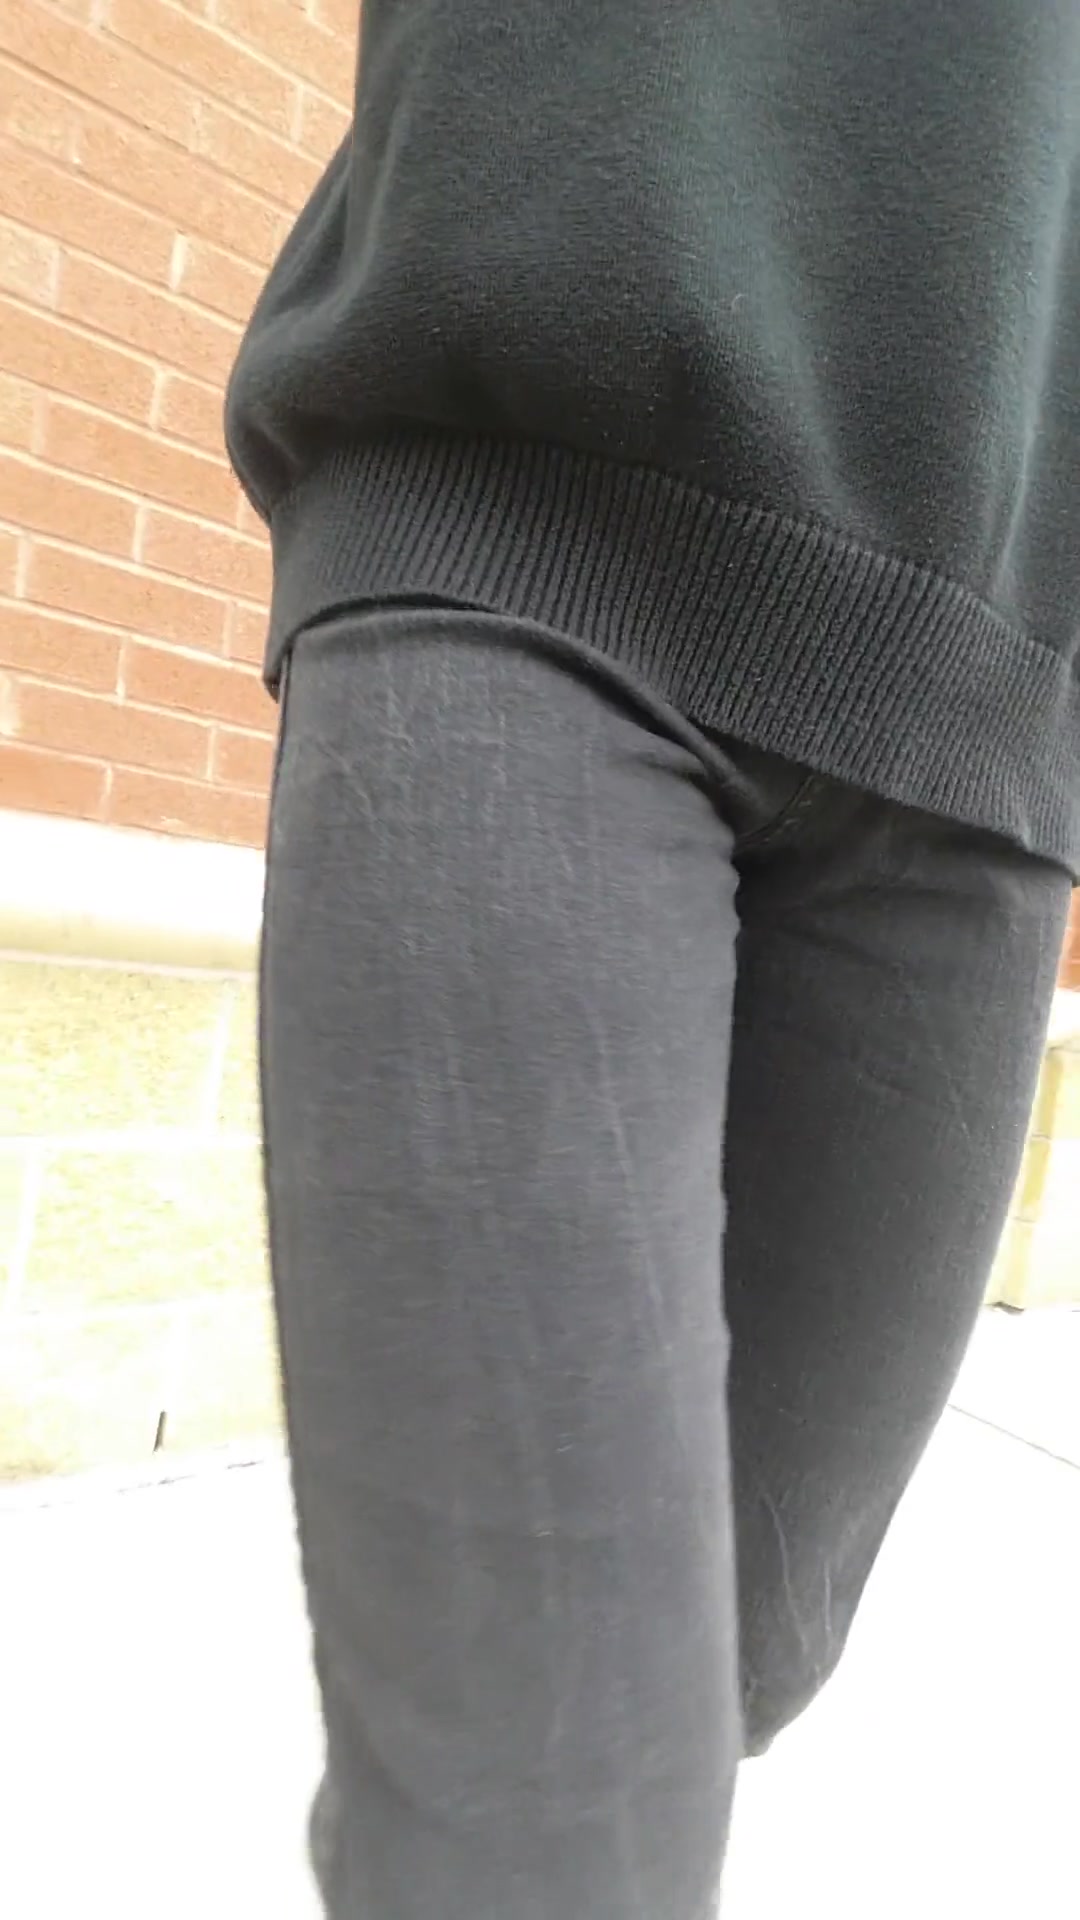 Peeing in tight jeans 2